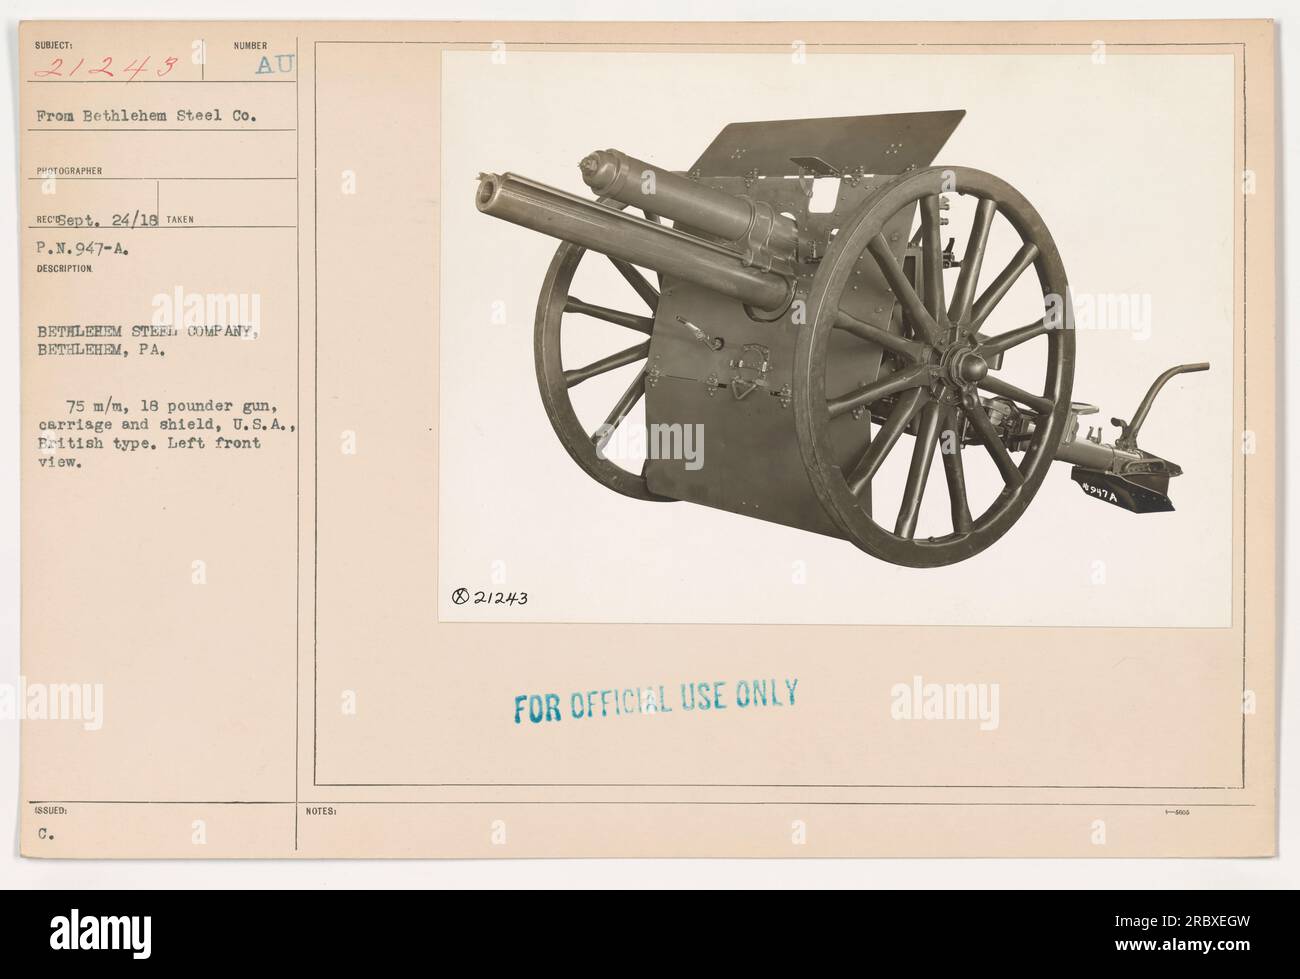 The image shows a 75 mm, 18-pounder gun from Bethlehem Steel Company in Bethlehem, PA. The gun is mounted on a carriage and is equipped with a shield. It is a US version of the British-type gun. The photograph is labeled '21243 FOR OFFICIAL USE ONLY 4947A.' Stock Photo